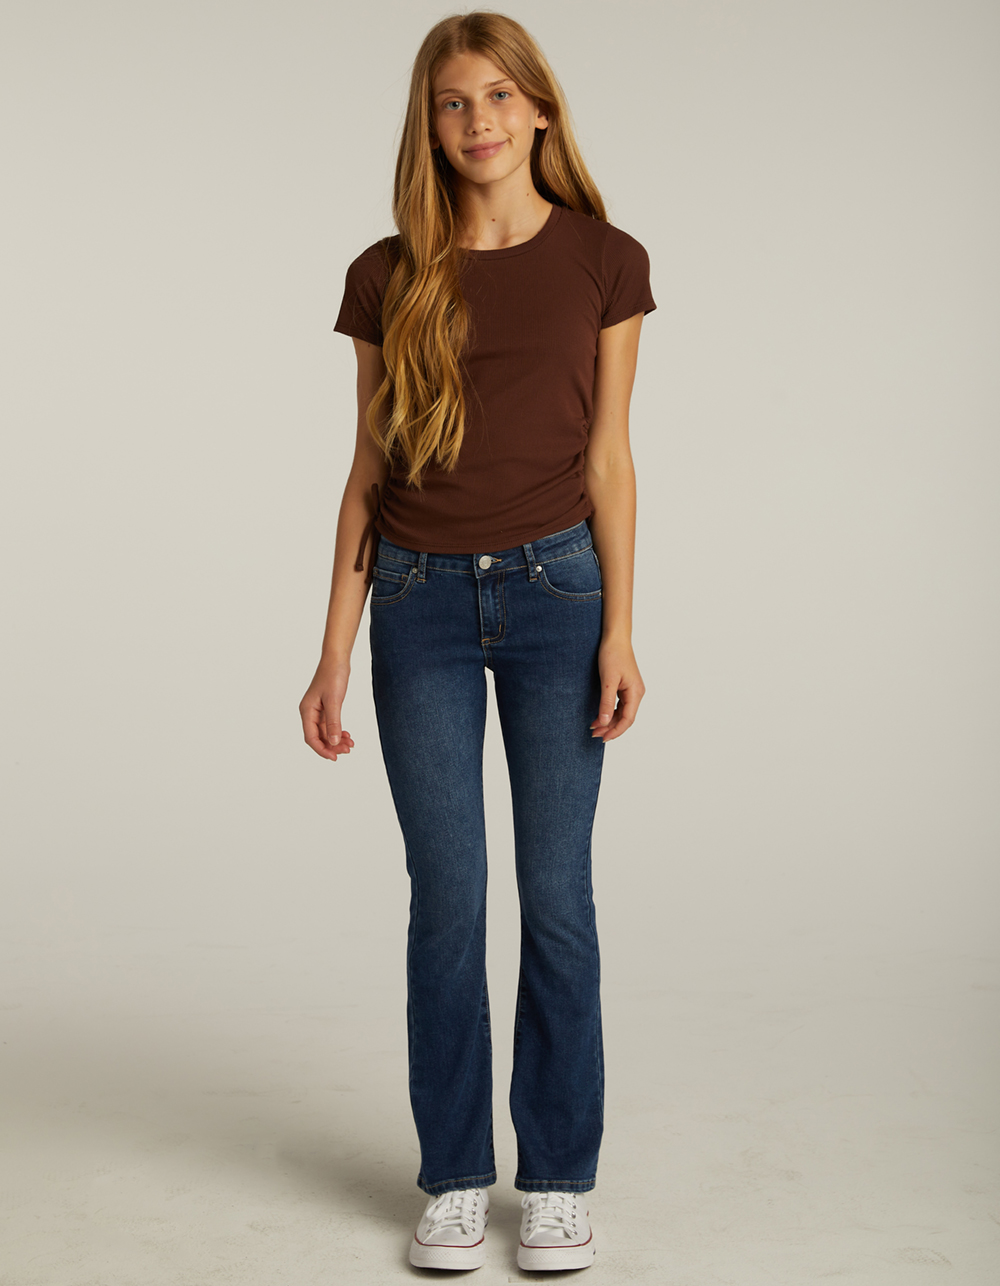 Low-Rise Dark Wash Flare Jeans